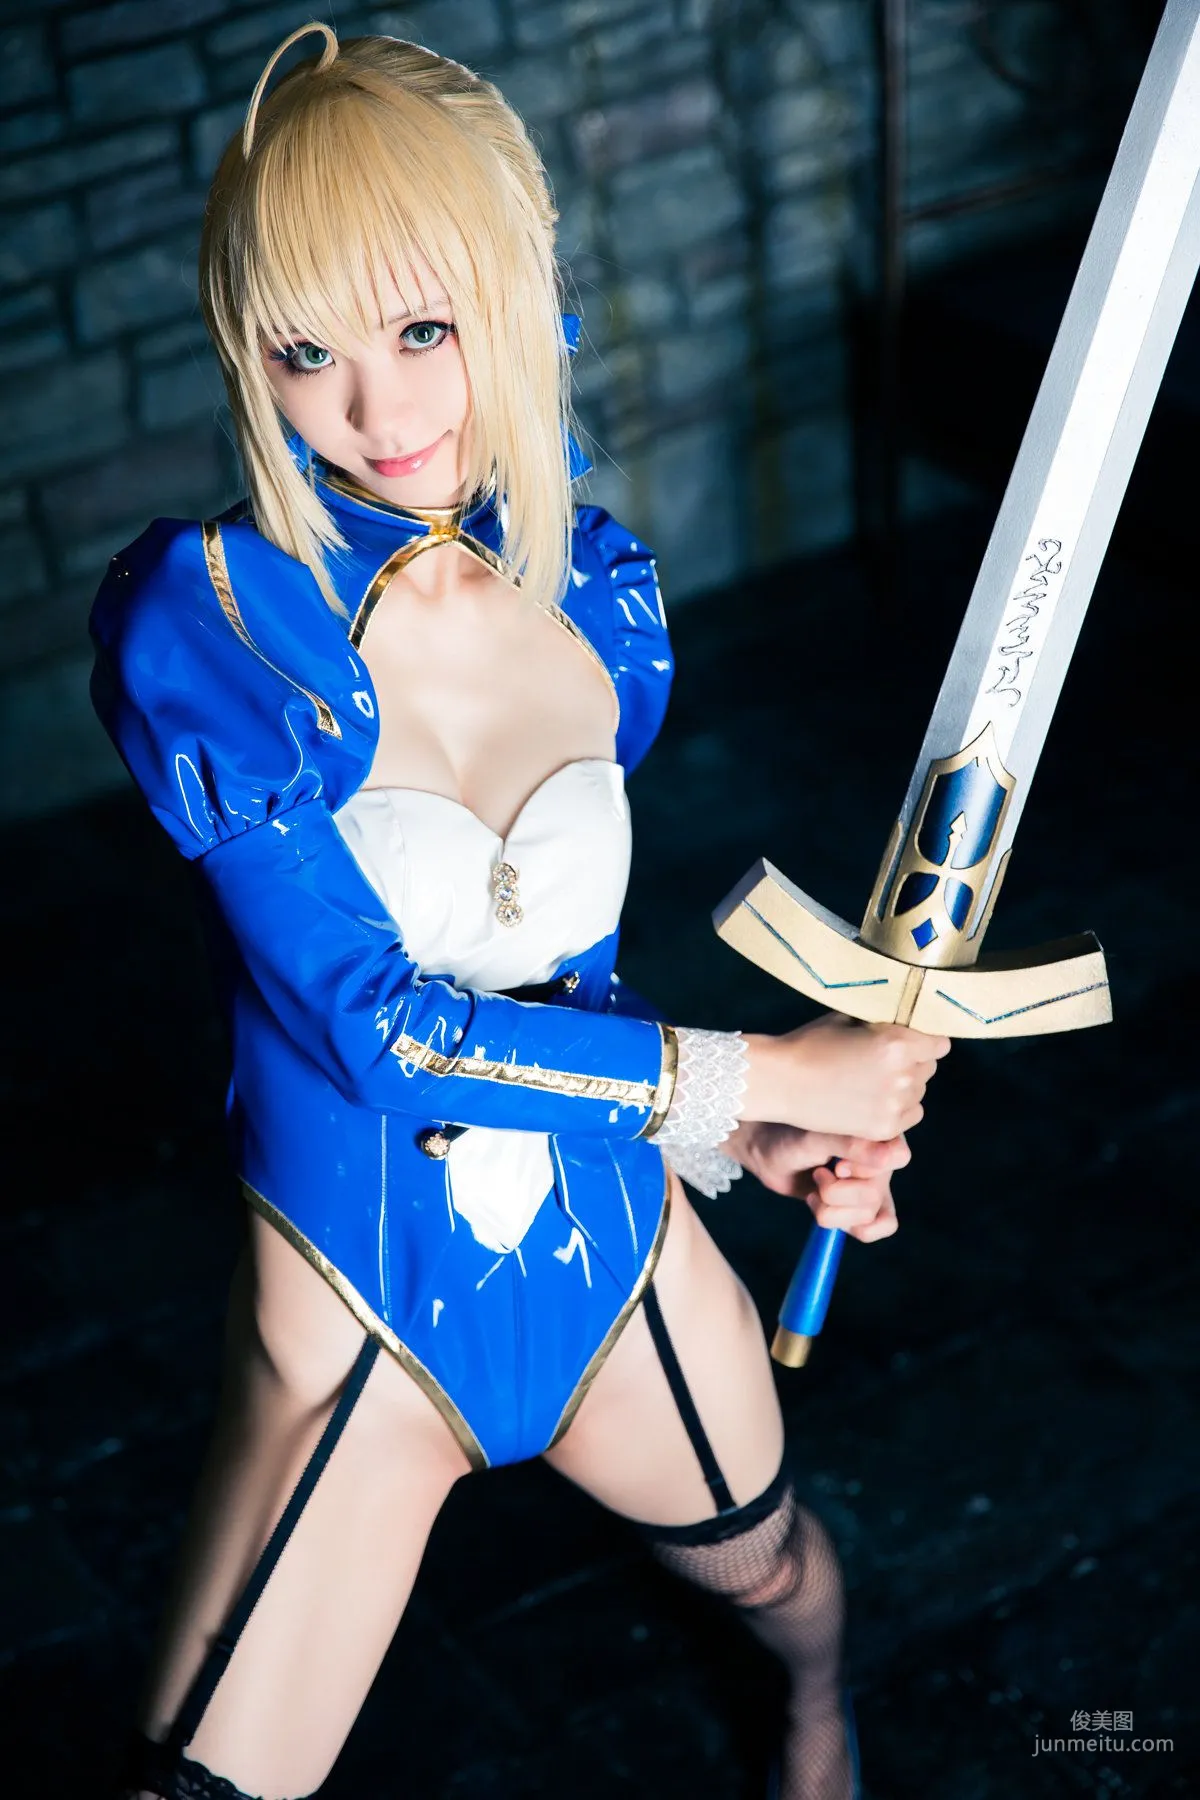 Mike(ミケ) 《Fate stay night》Saber [Mikehouse] 写真集24